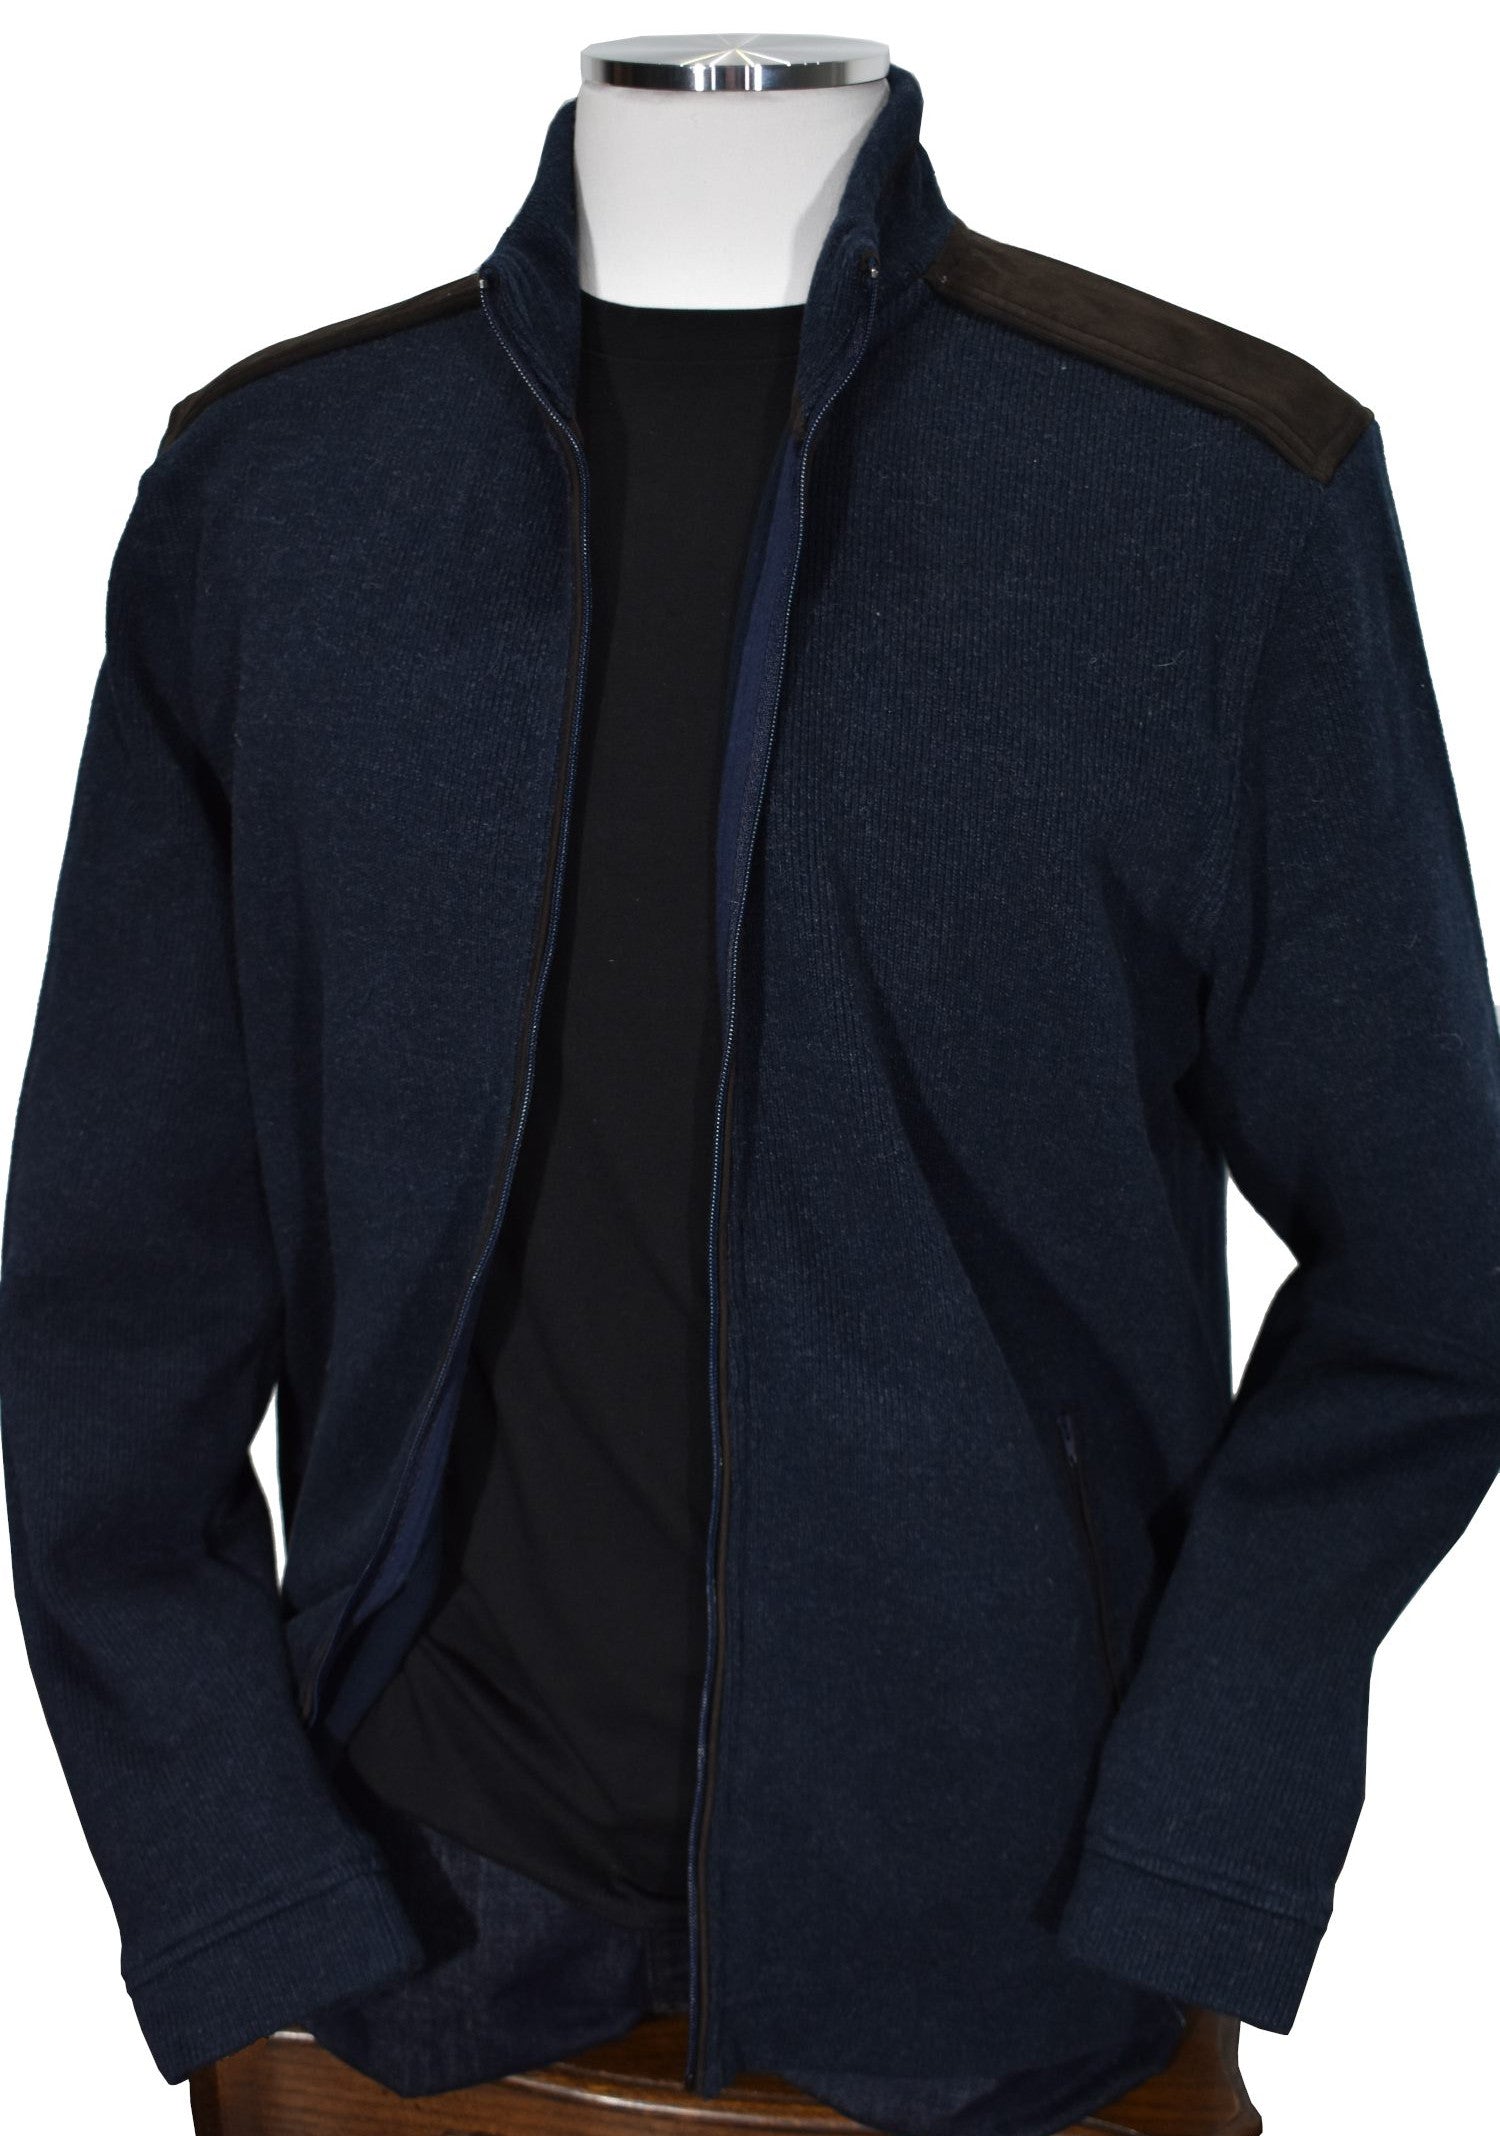 Stay stylish on the go with the ZN6307 Brecken Sport Cardigan. This full zip cardigan model is crafted from soft navy fabric with fine rib detailing and chocolate ultra suede on the shoulders and zippers for a tasteful, exclusive look. It can be worn alone, as a layer, or open like a jacket to beautifully accent any outfit. Light to medium weight performance cotton microfiber fabric ensures all-day comfort.